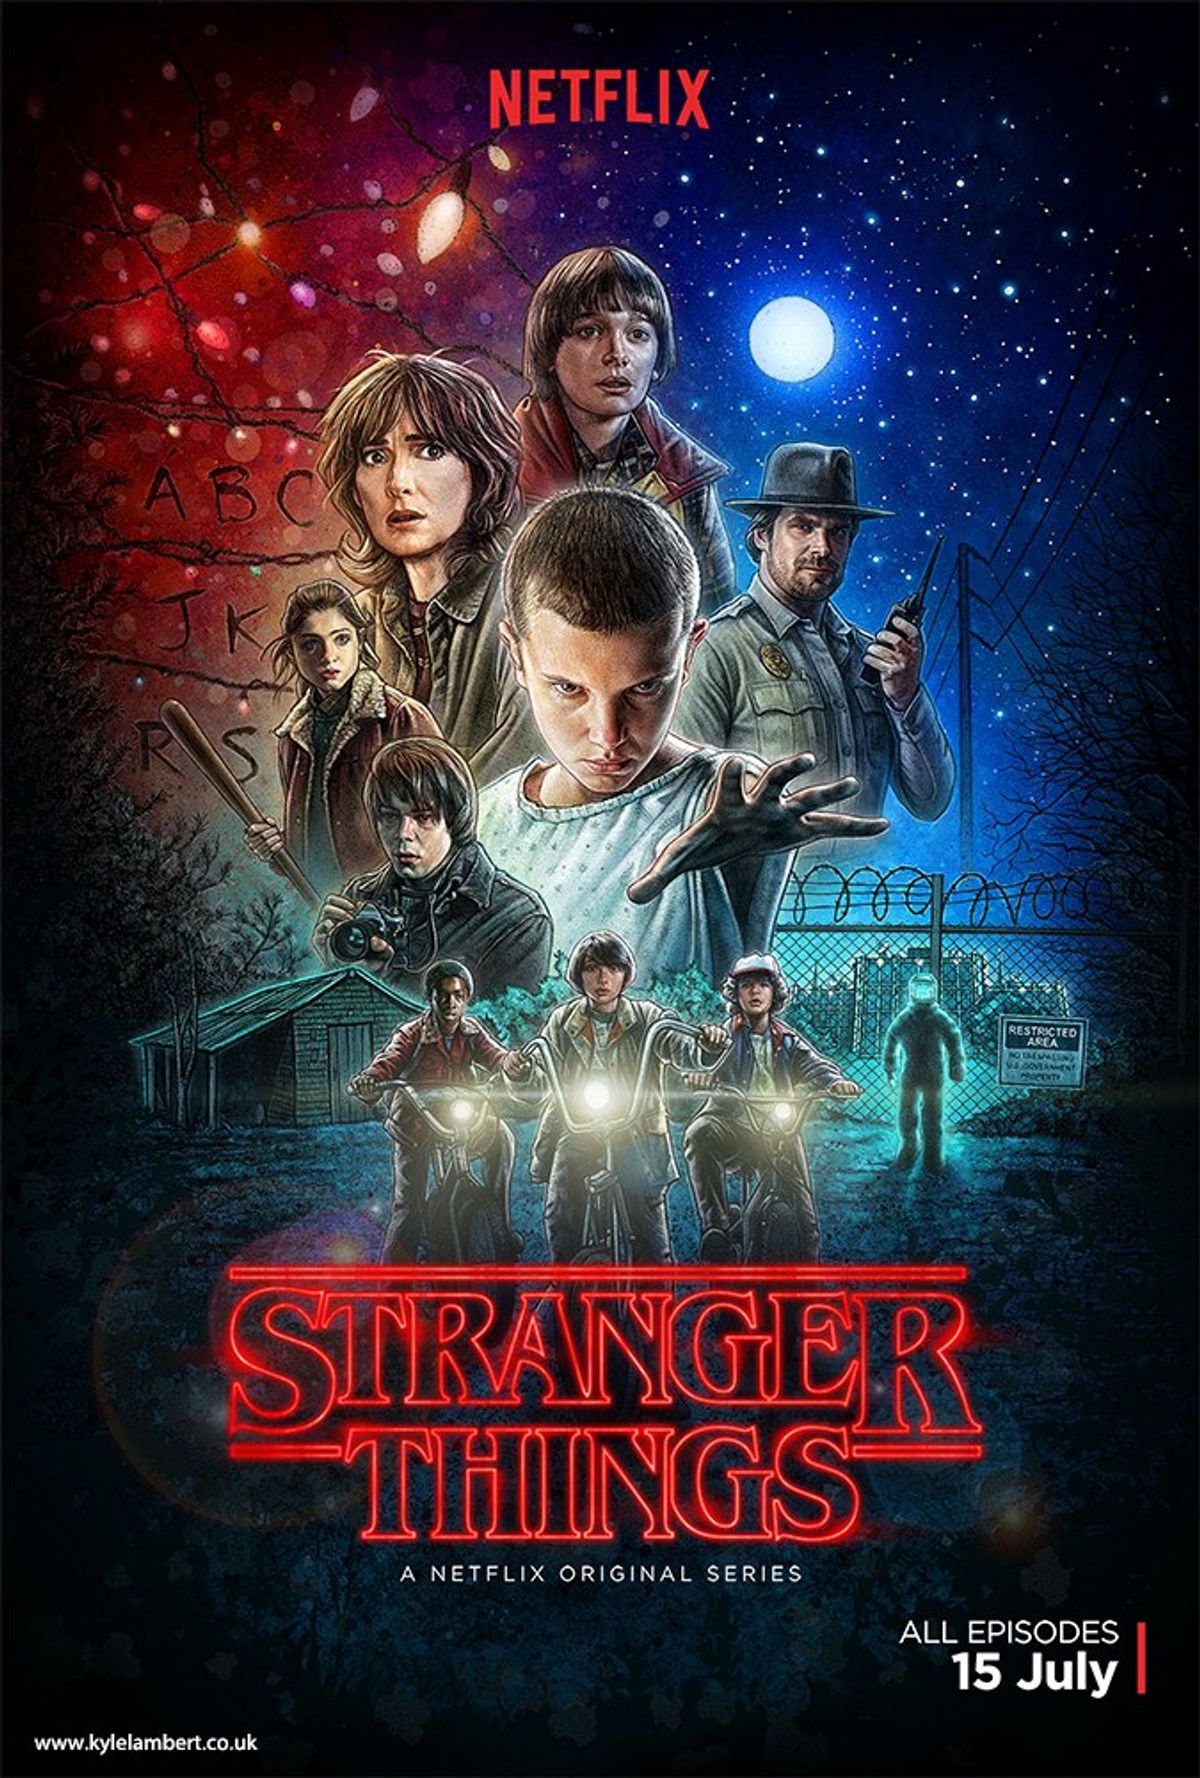 "Stranger Things" Review: A Perfectly Re-Mastered Piece Of 80s Nostalgia